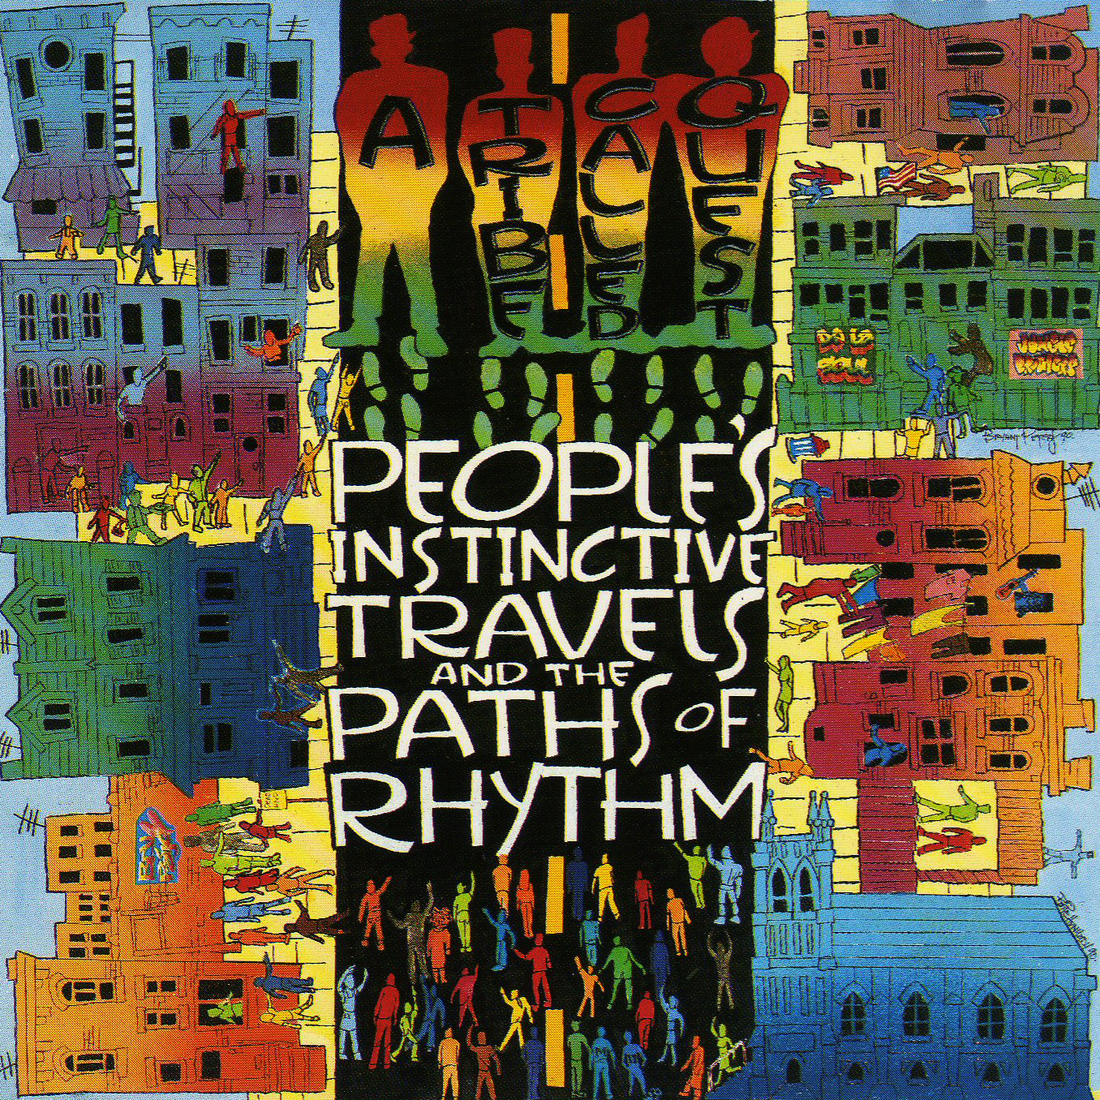 A Tribe Called Quest "People's Instinctive Travels and the Paths of Rhythm" 2xLP Vinyl